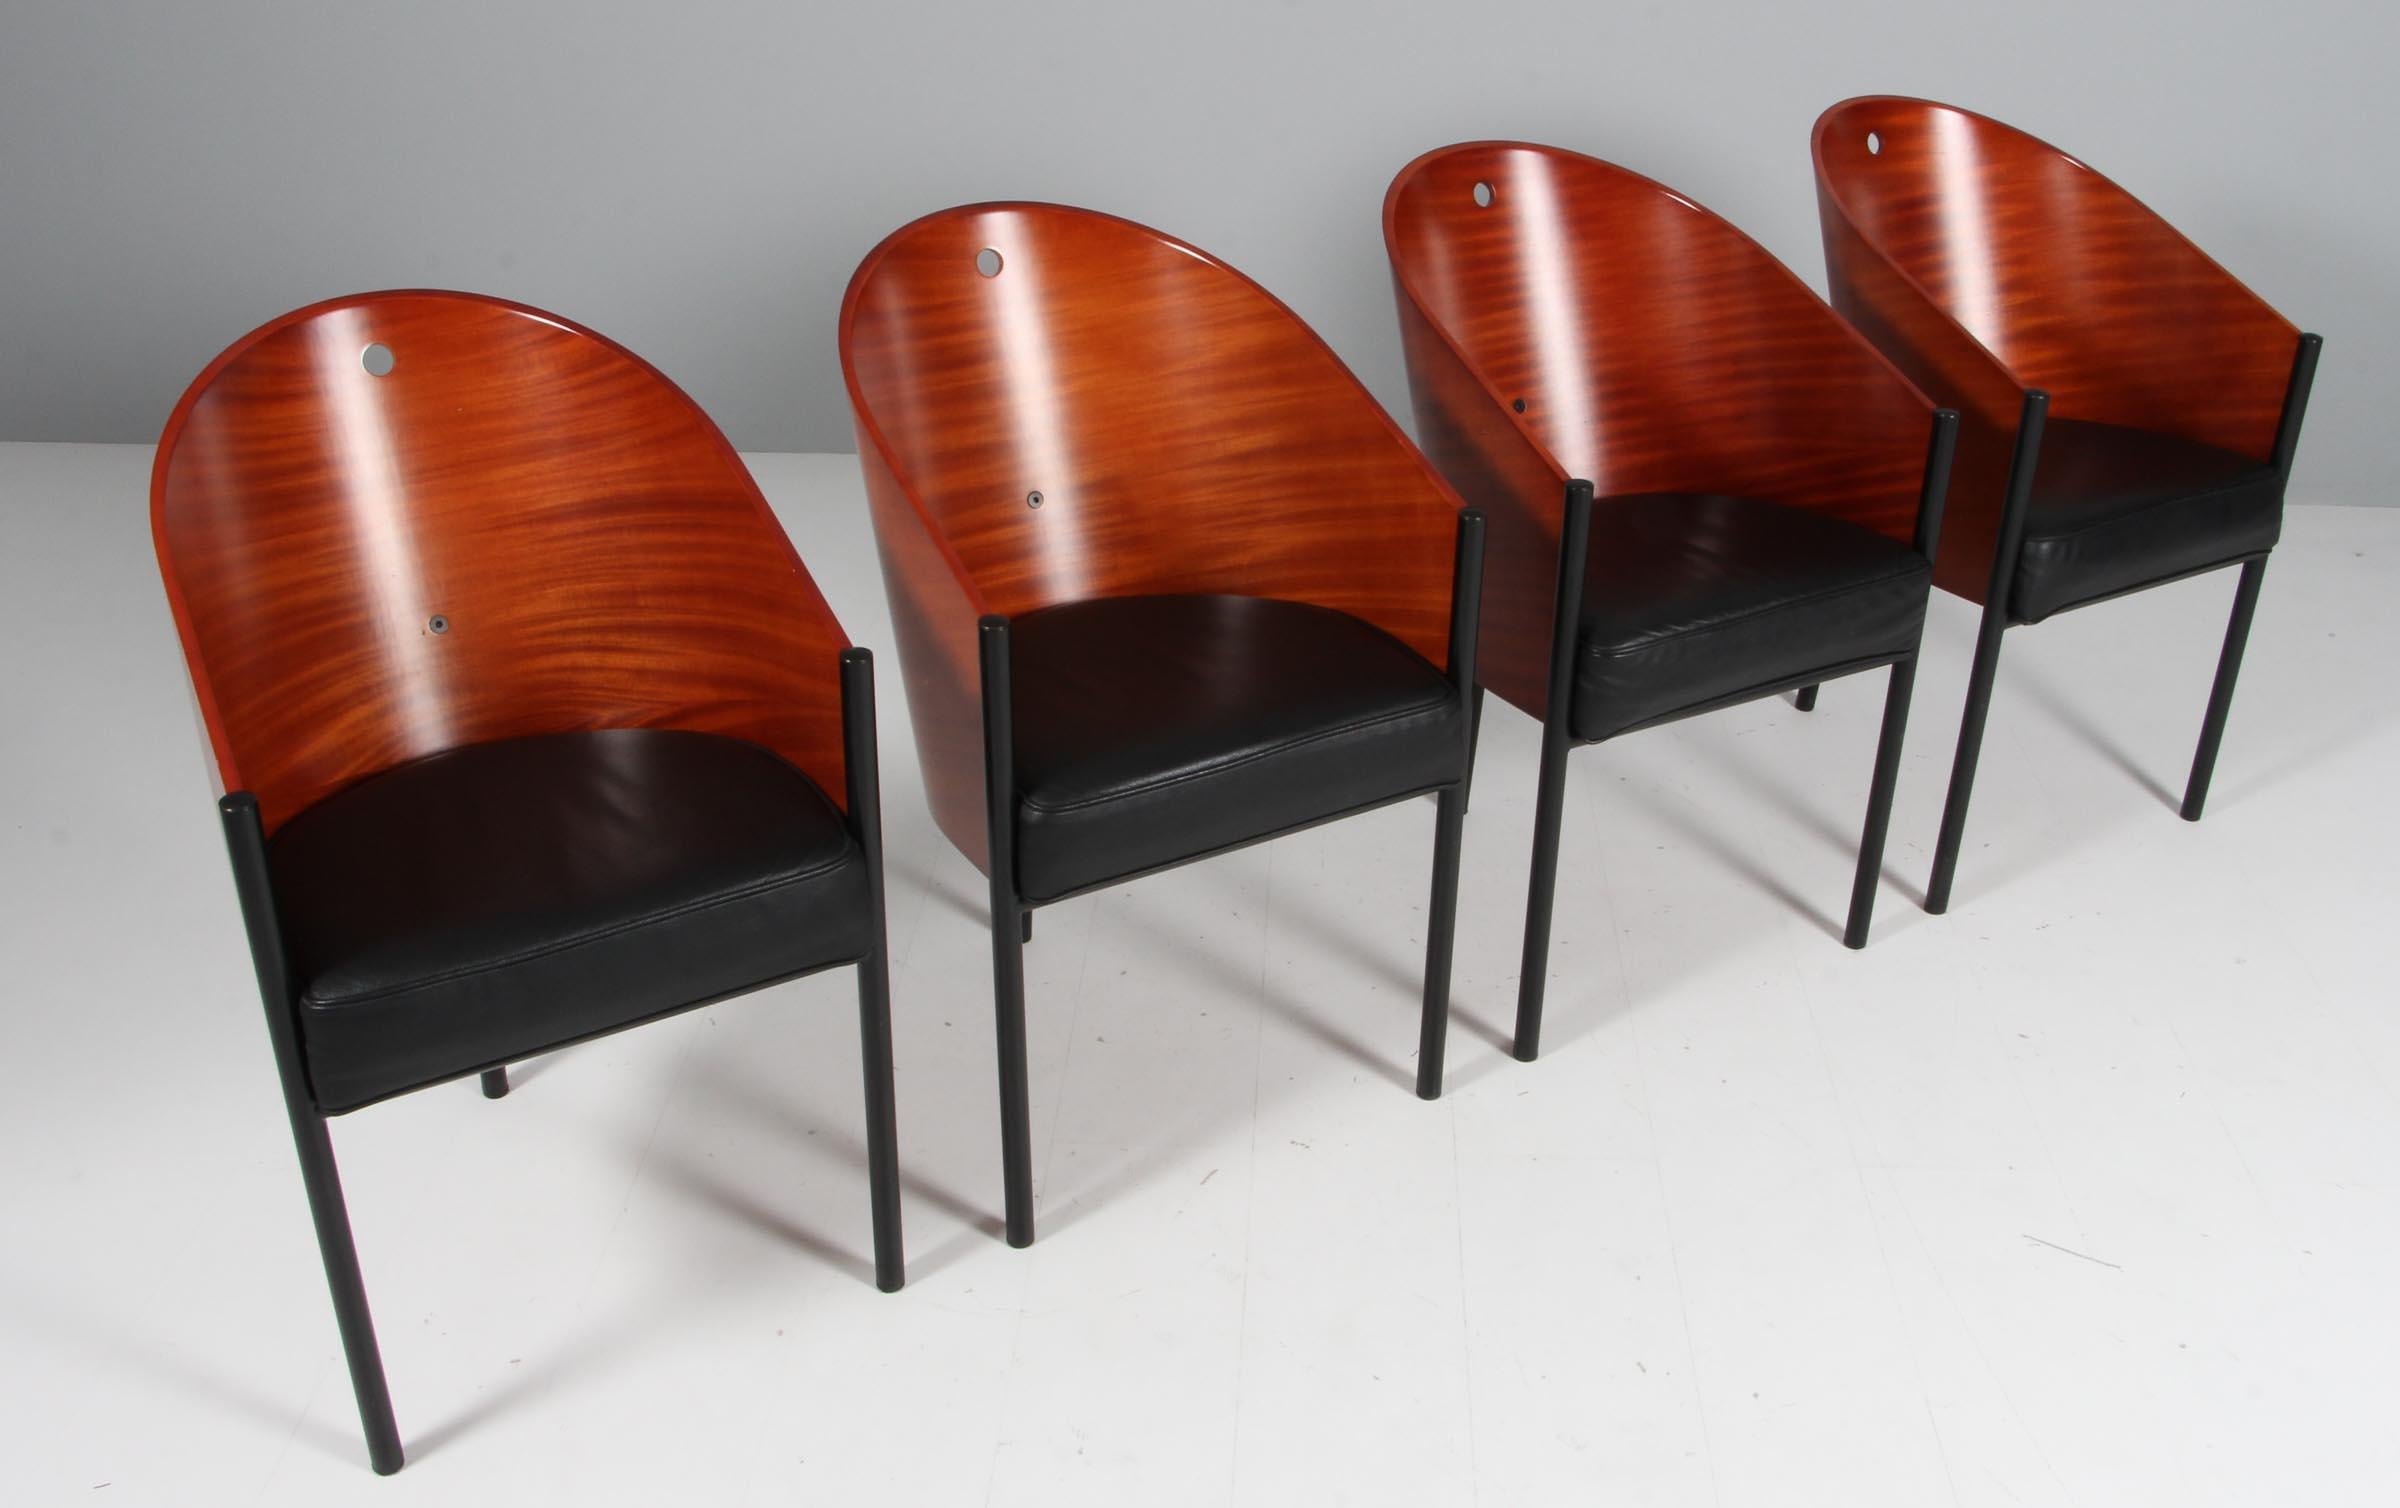 Great matching set of Vintage King Costes chairs.
Designed by Philippe Starck for driade.
Frame of mahogany, base of black lacquered steel. Seat of black leather.
